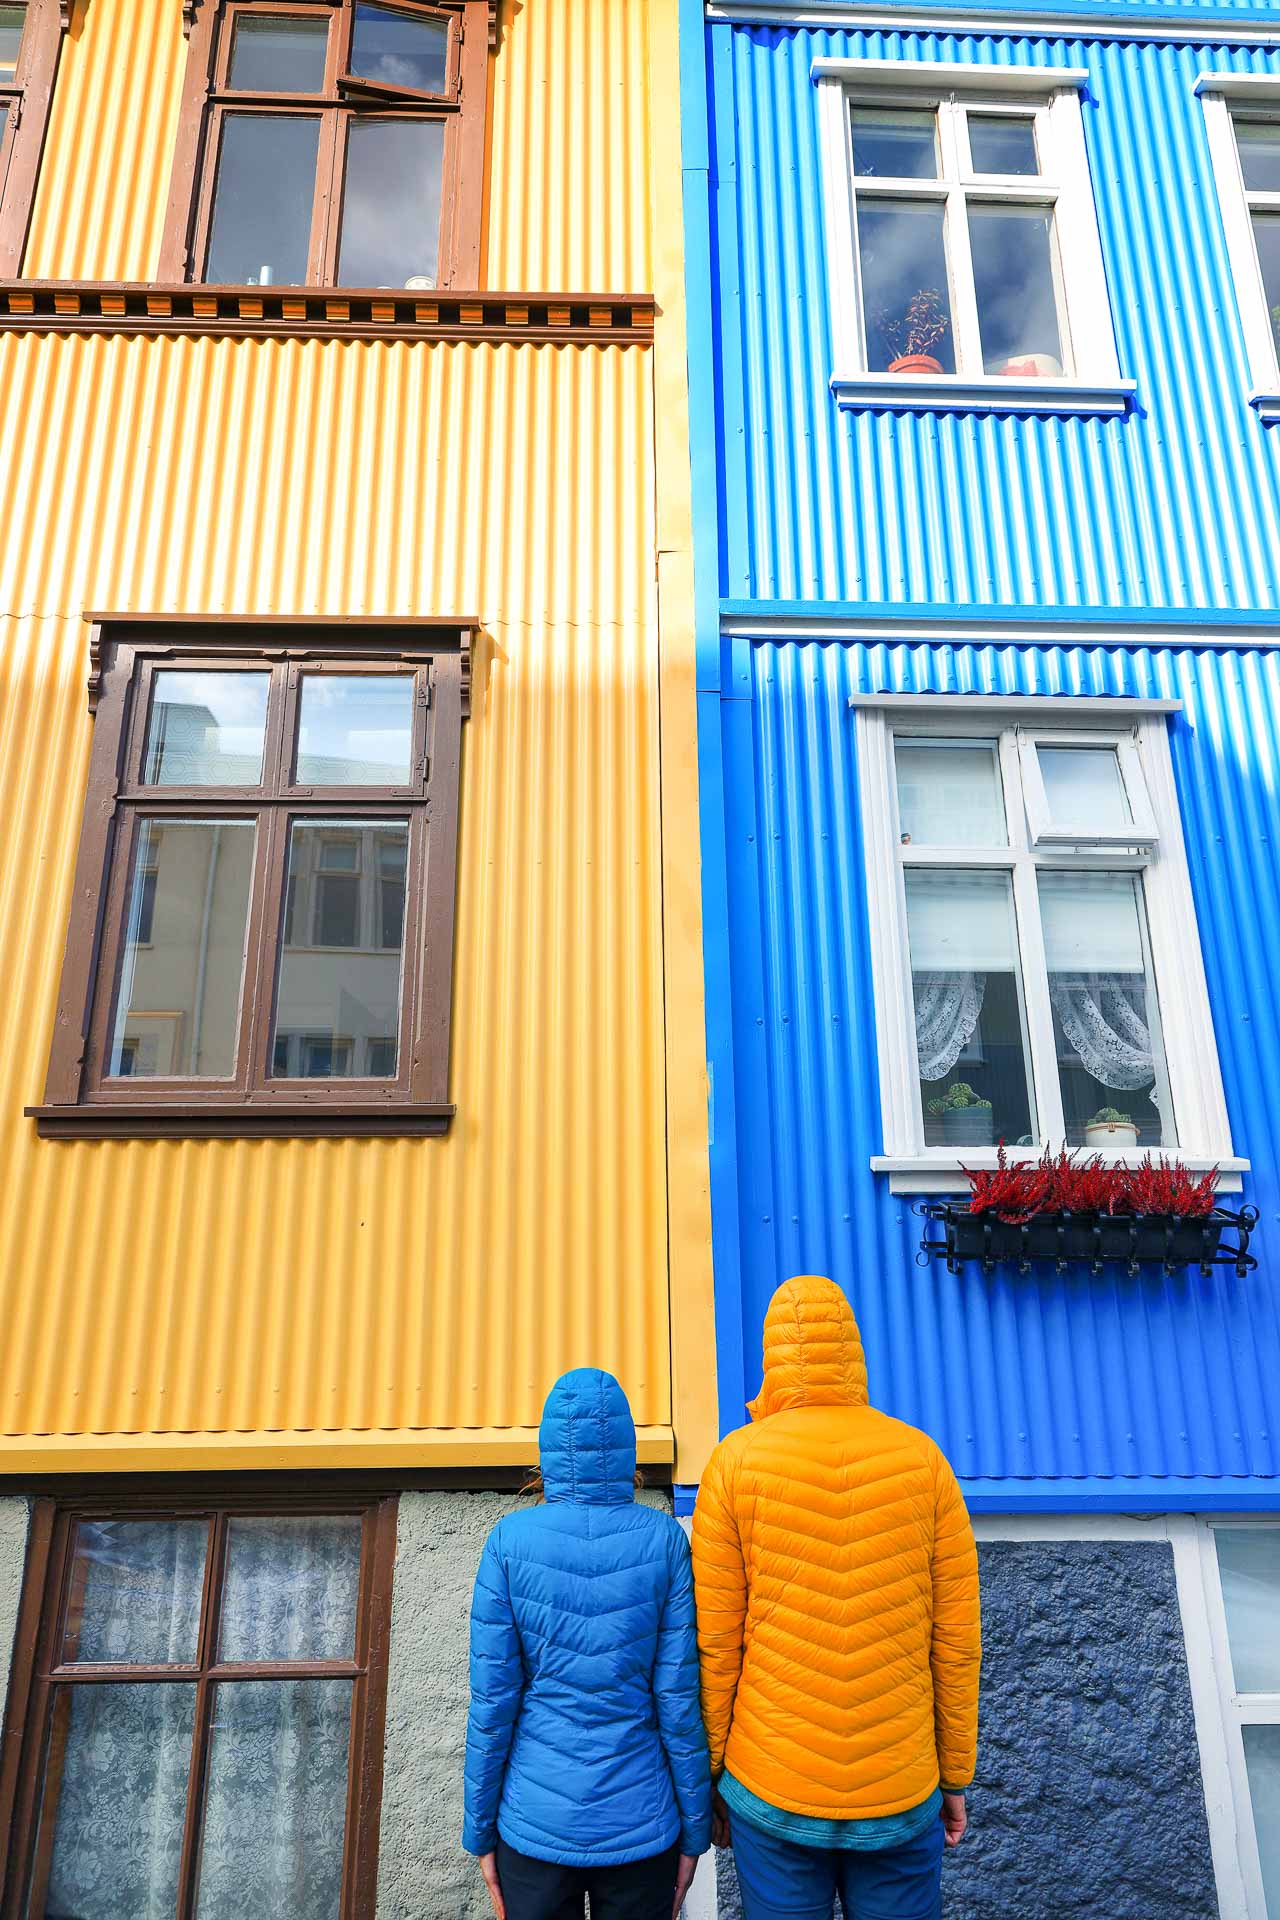 Architectural detail in Reykjavik, the capital and largest city of Iceland.